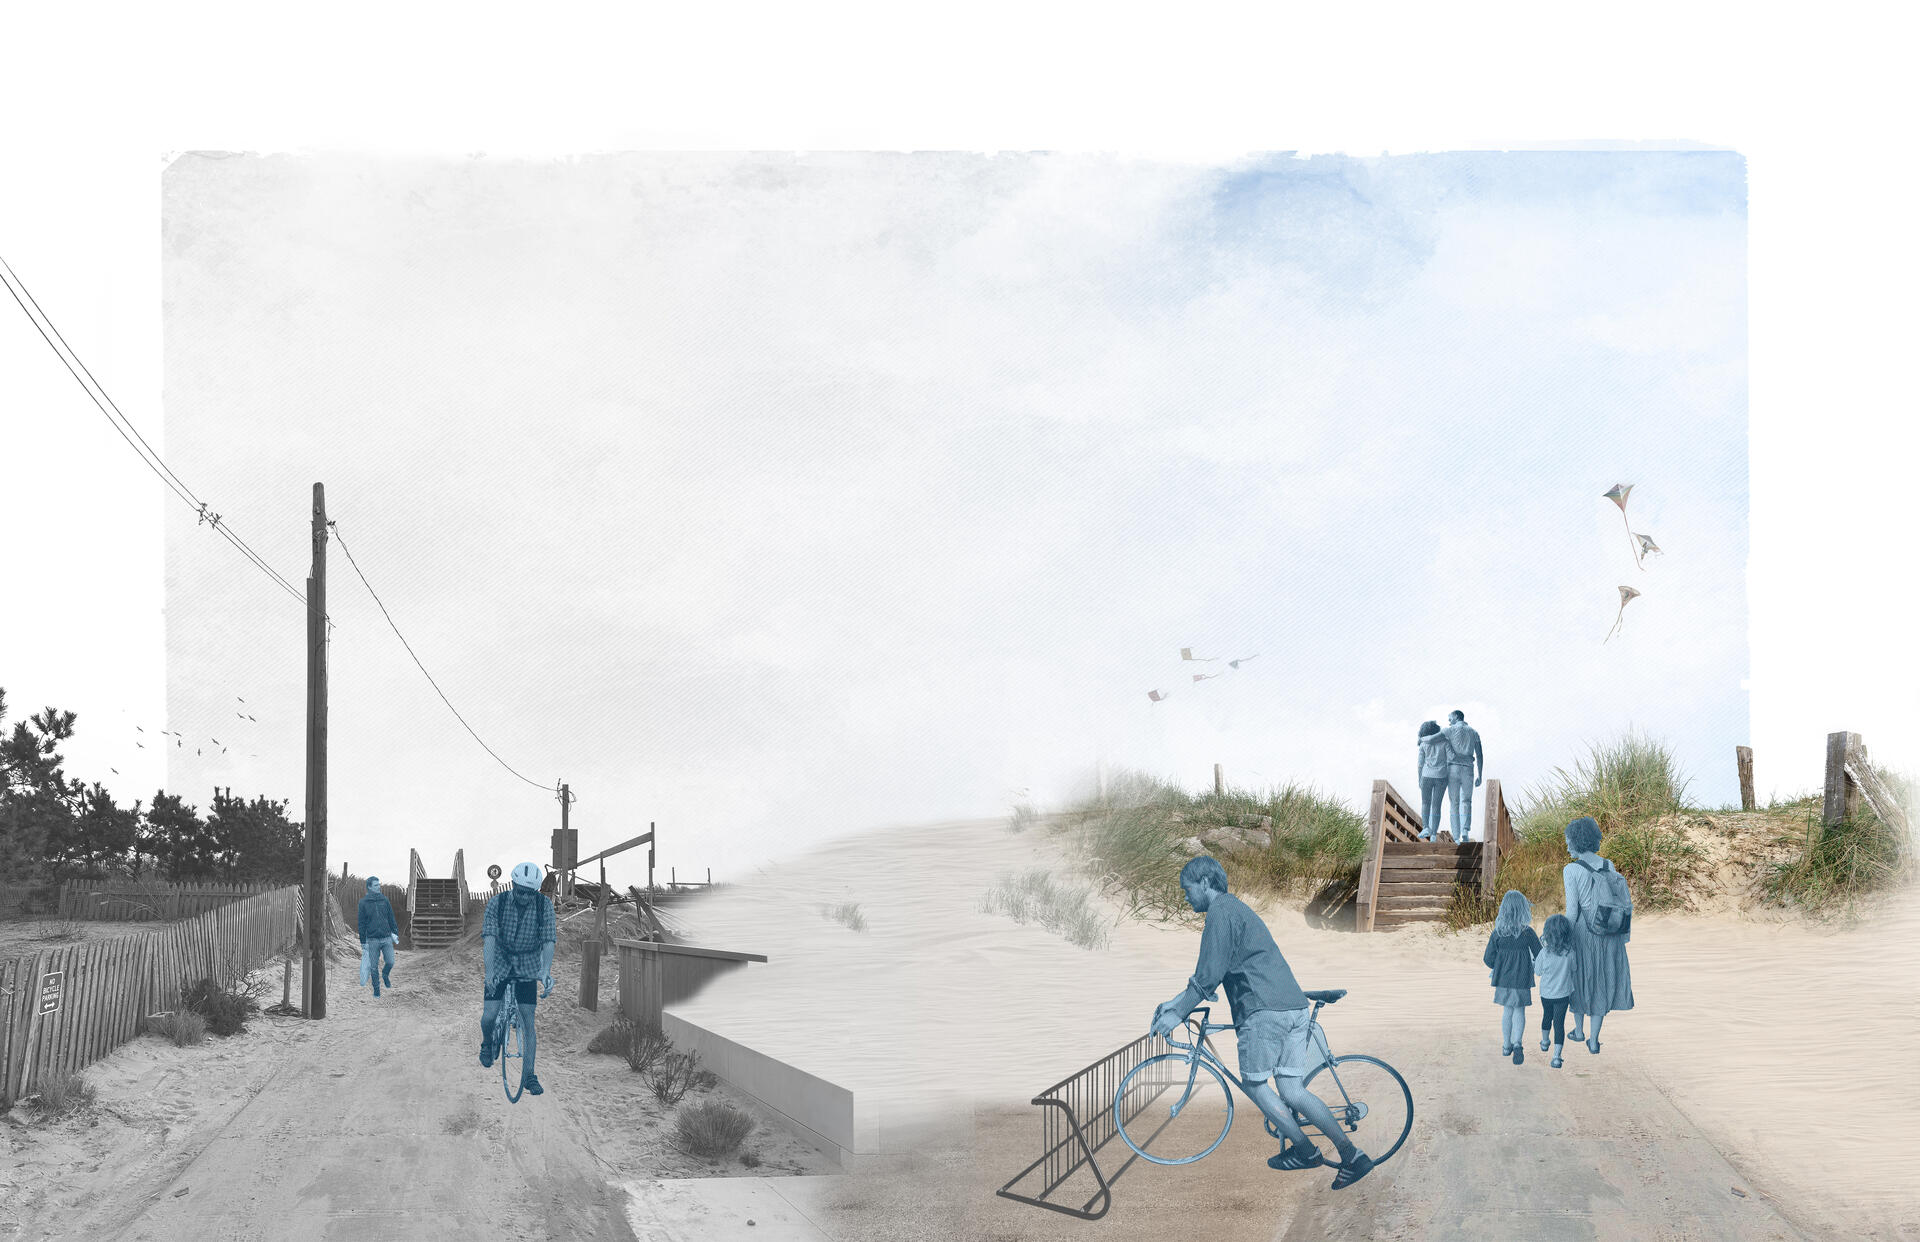 Digital collage visualizing a transition from the existing experience of beach access at Fire Island to a new future experience.